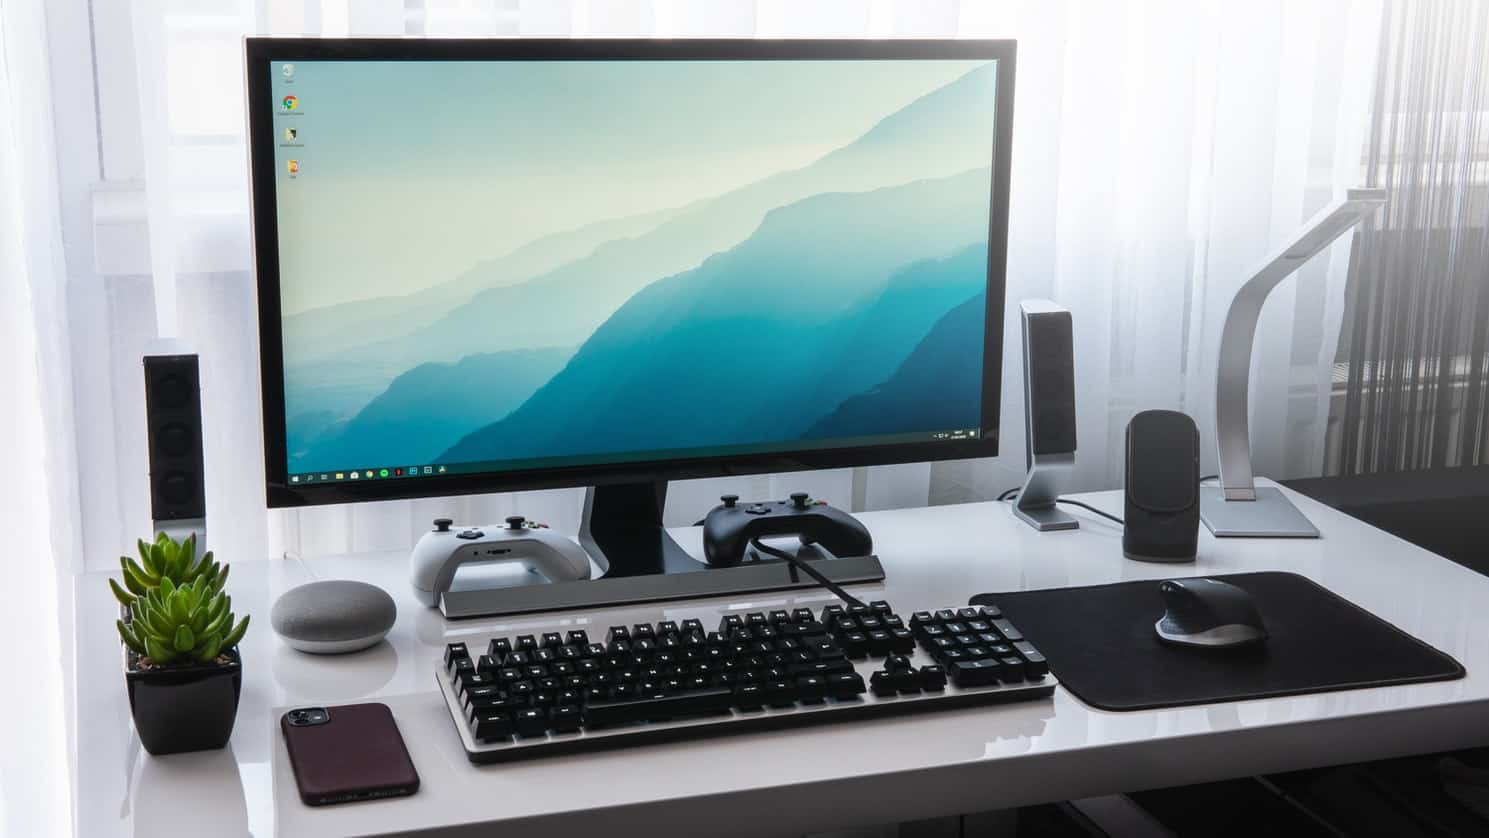 10 Best Monitors for Your PC Under $100 - Lifehack